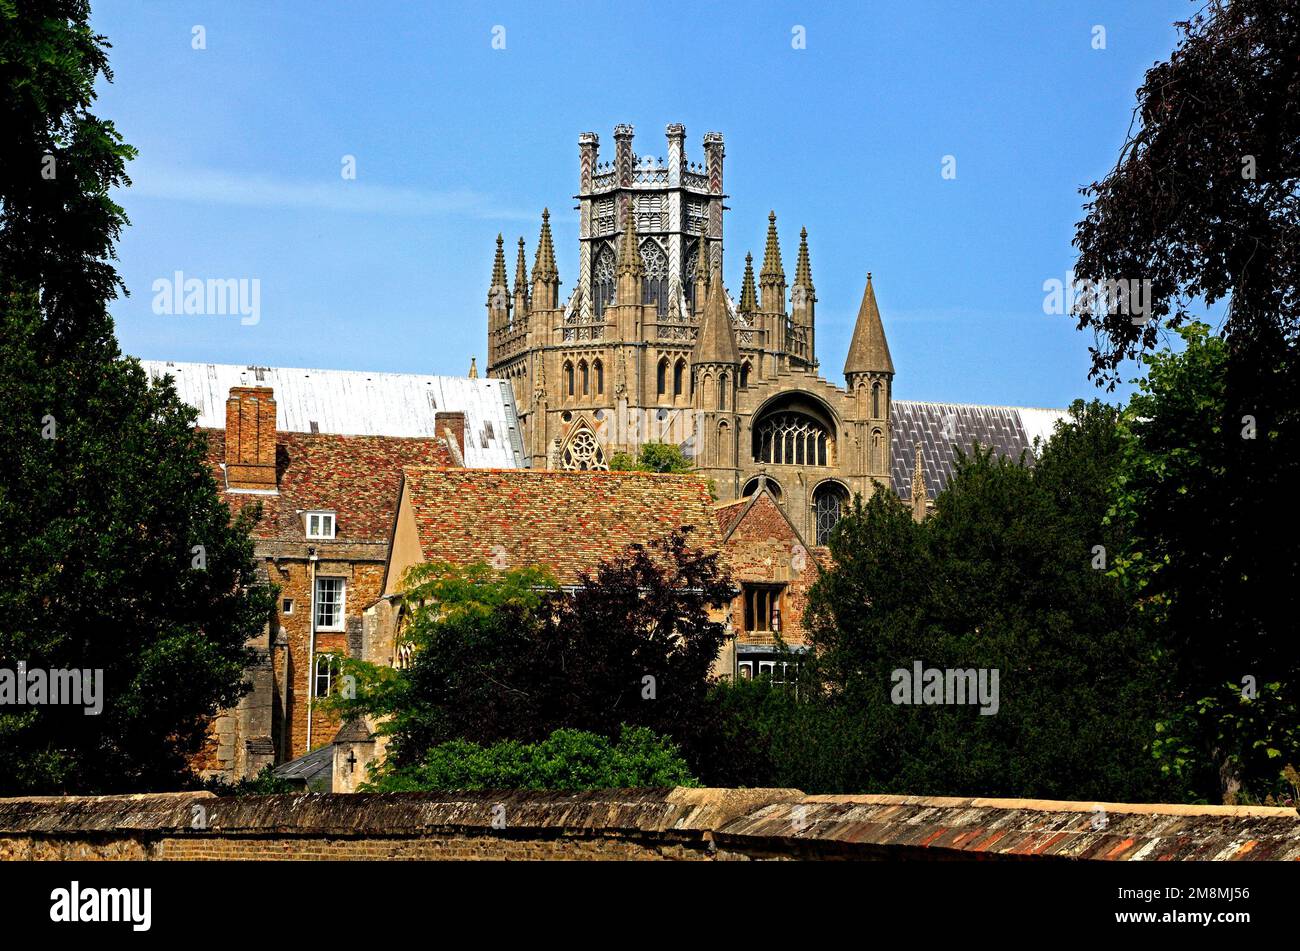 Ely, Cathedral, The Octagon and Lantern Towers, Cambridgeshire, England, UK Stock Photo